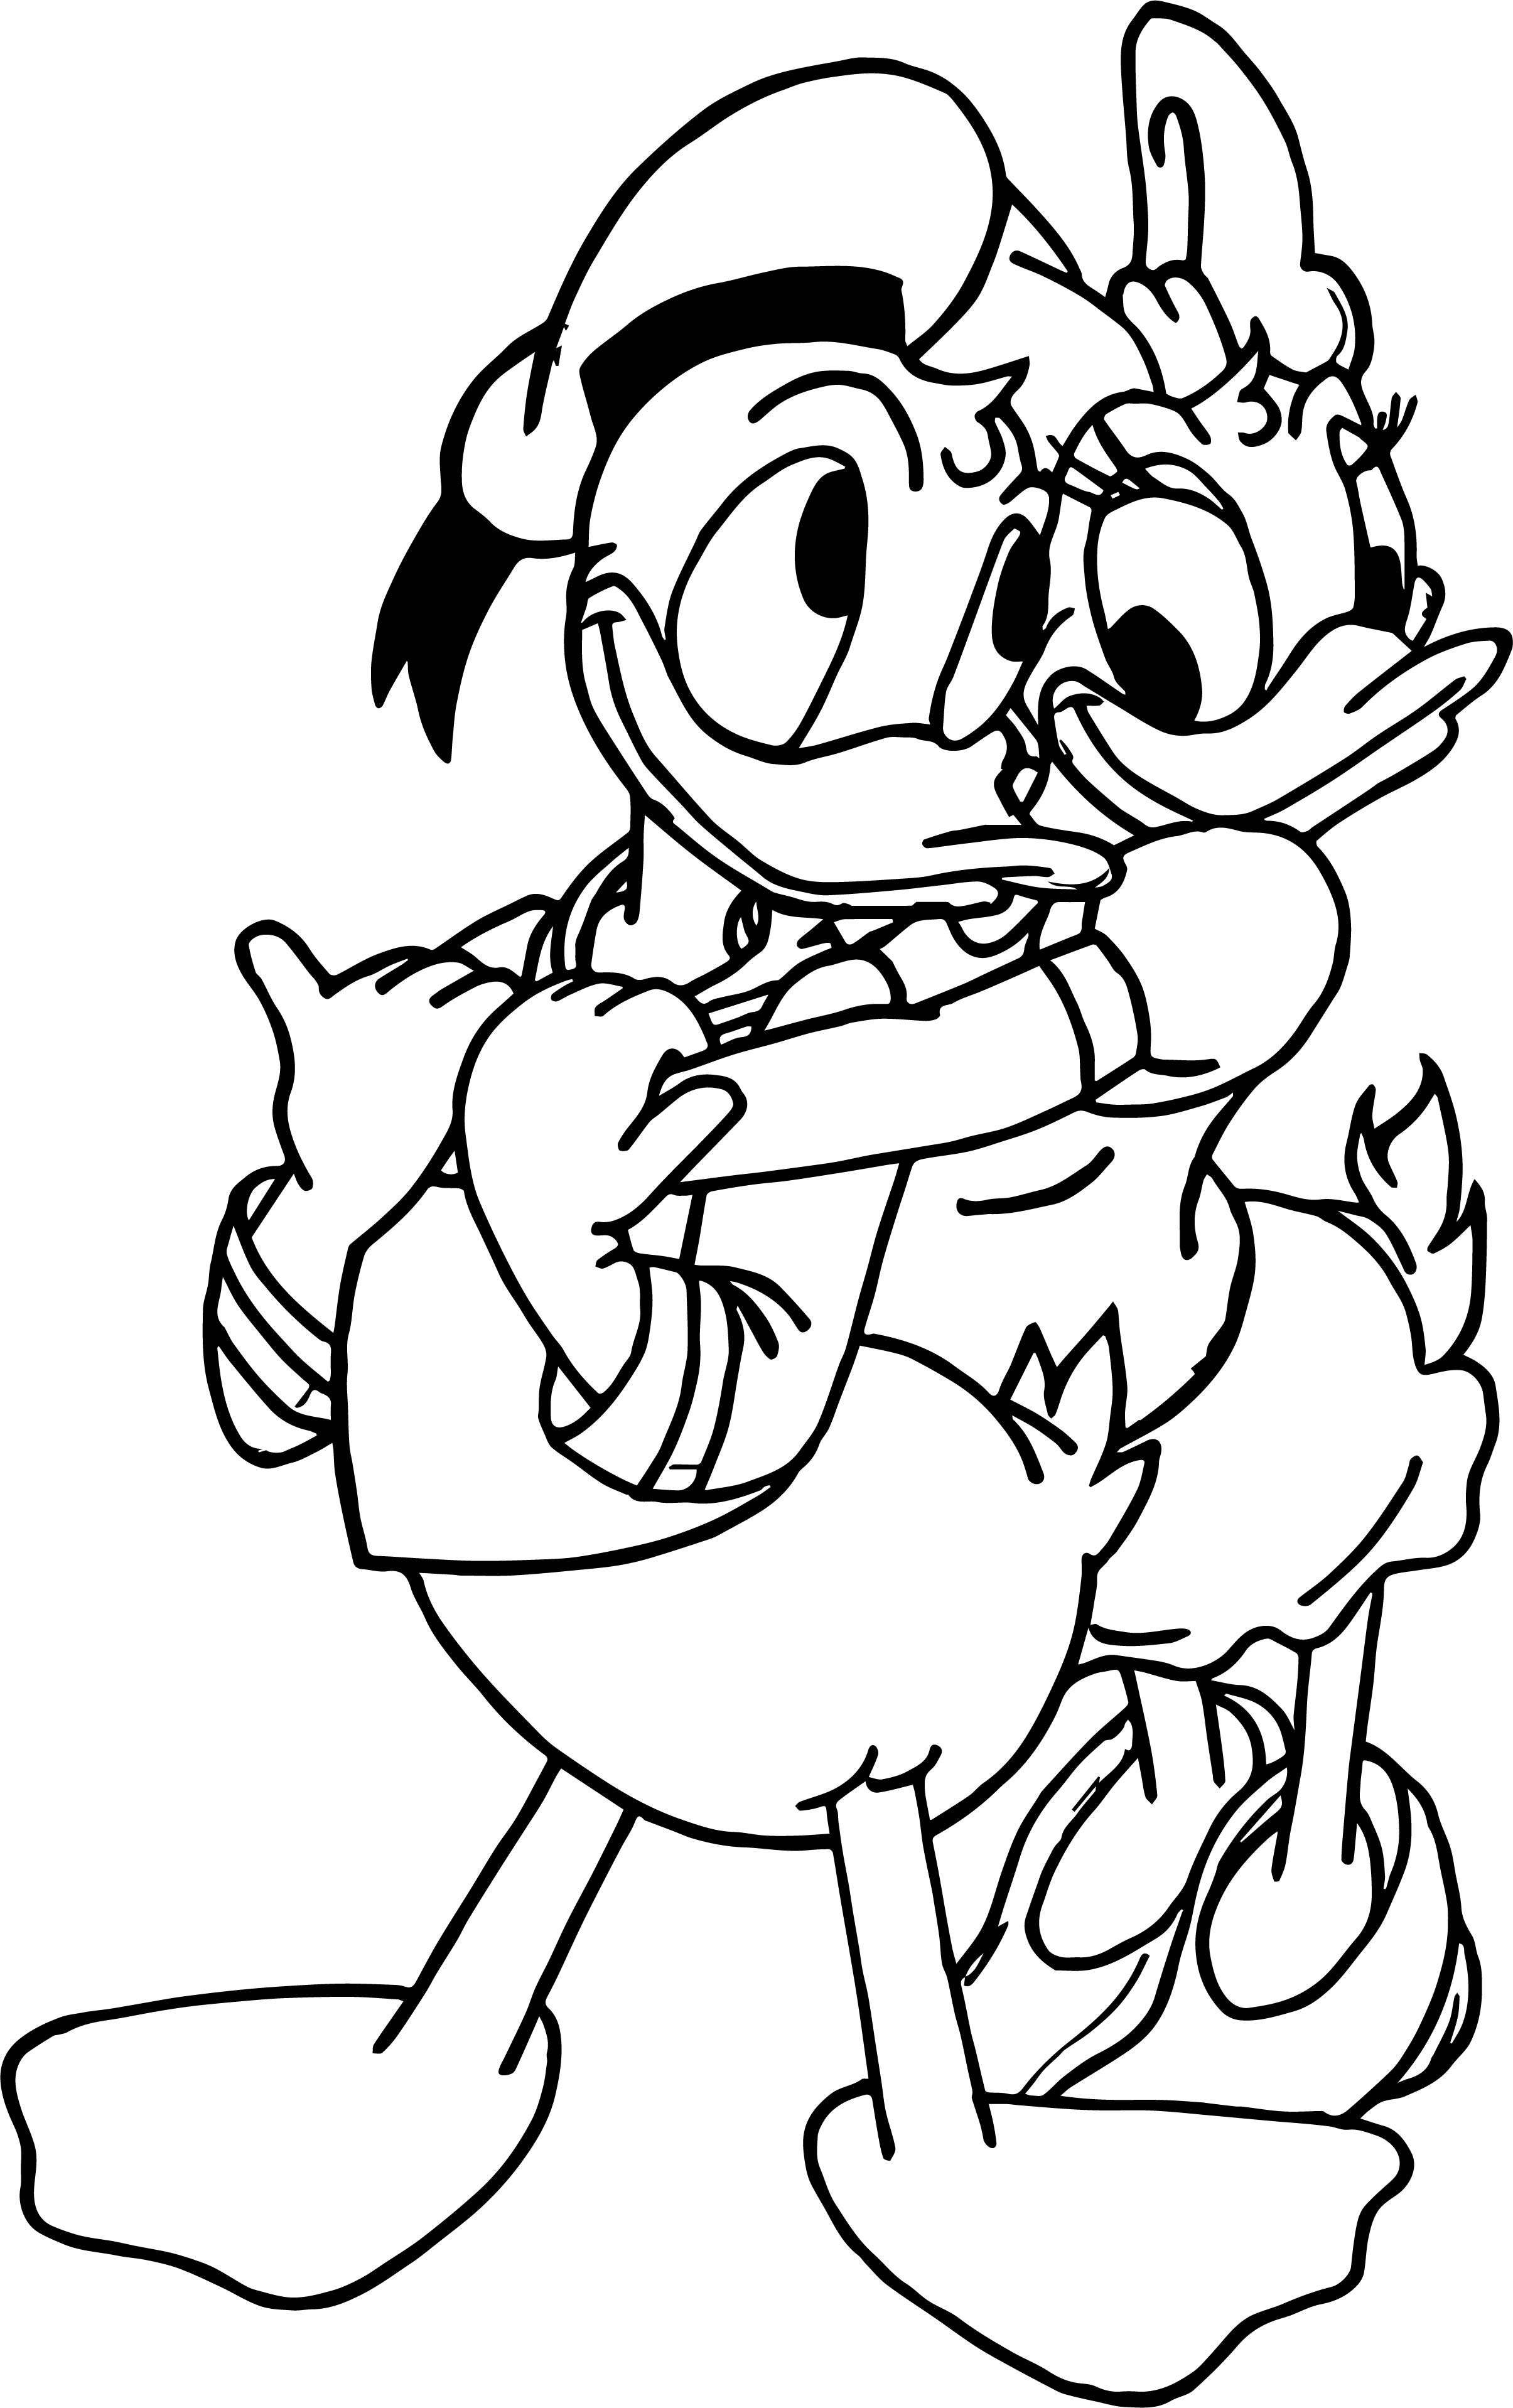 Donald And Daisy Duck Coloring Pages at GetColorings.com | Free